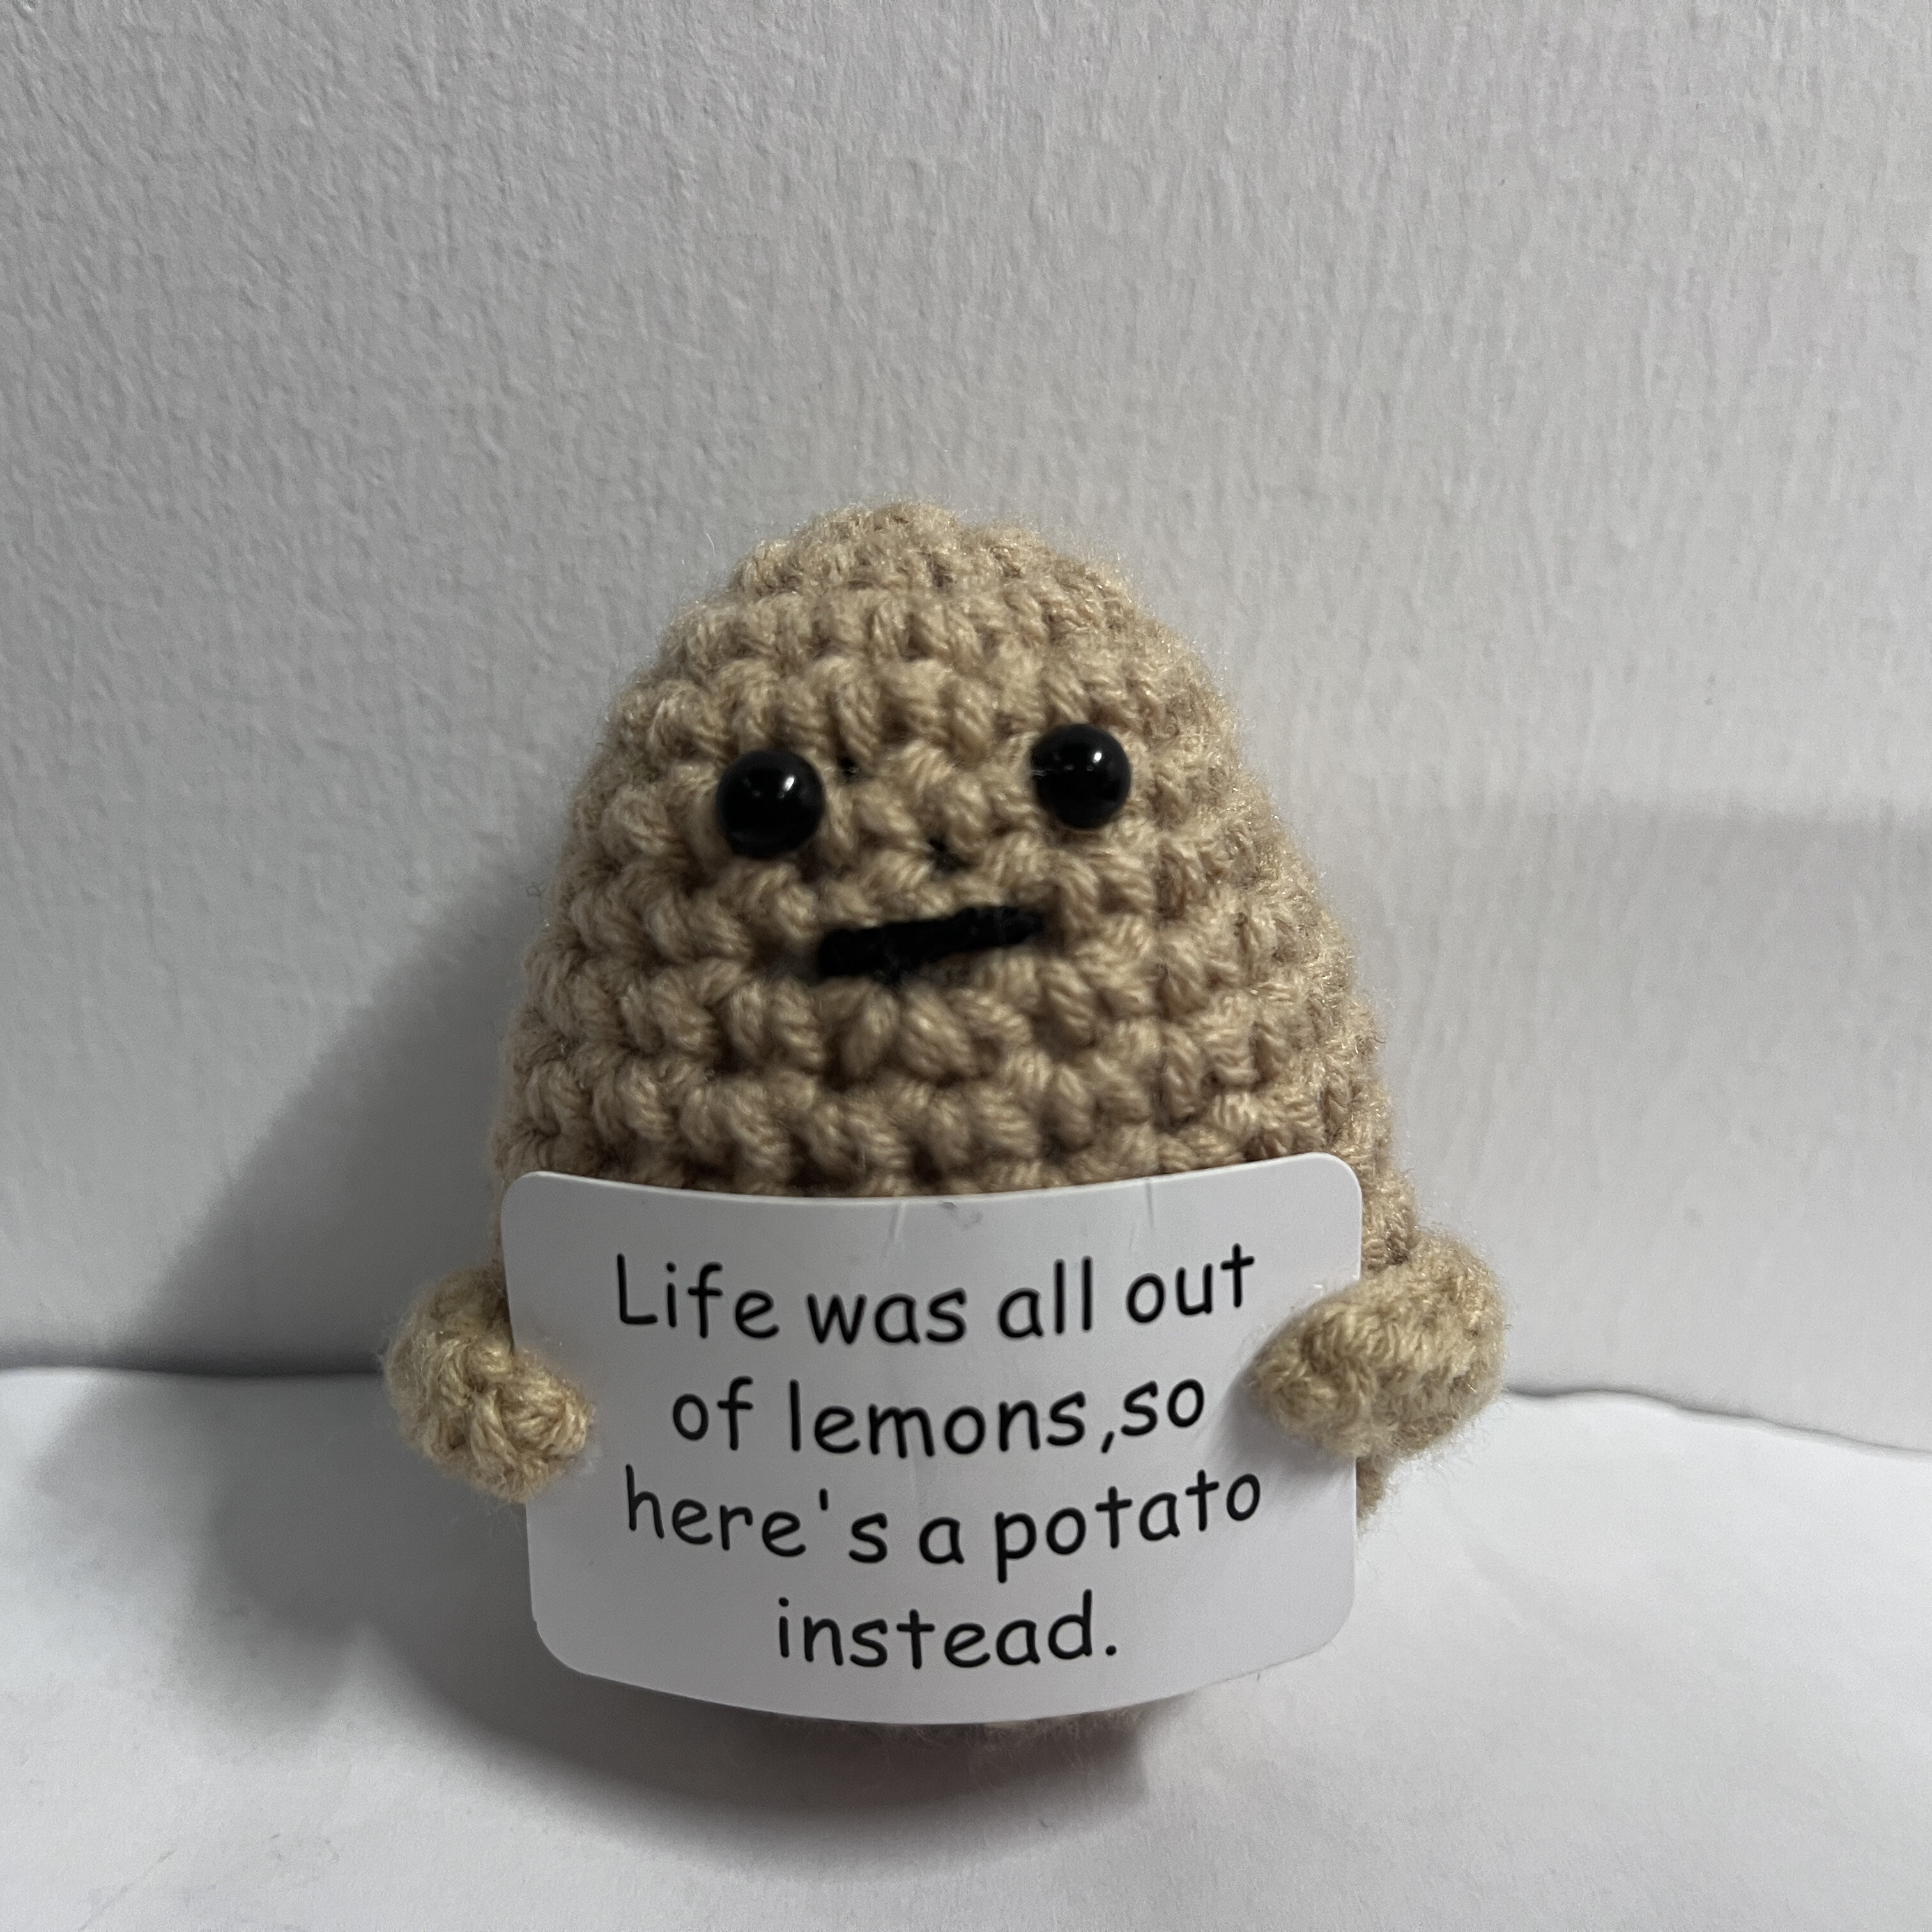 Buy Positive Potato the Original Affirmation, Novelty Doll/figure.  Motivational, Pick Me Up, Brighten Your Day, Happy, Mental Health Gift  Online in India 